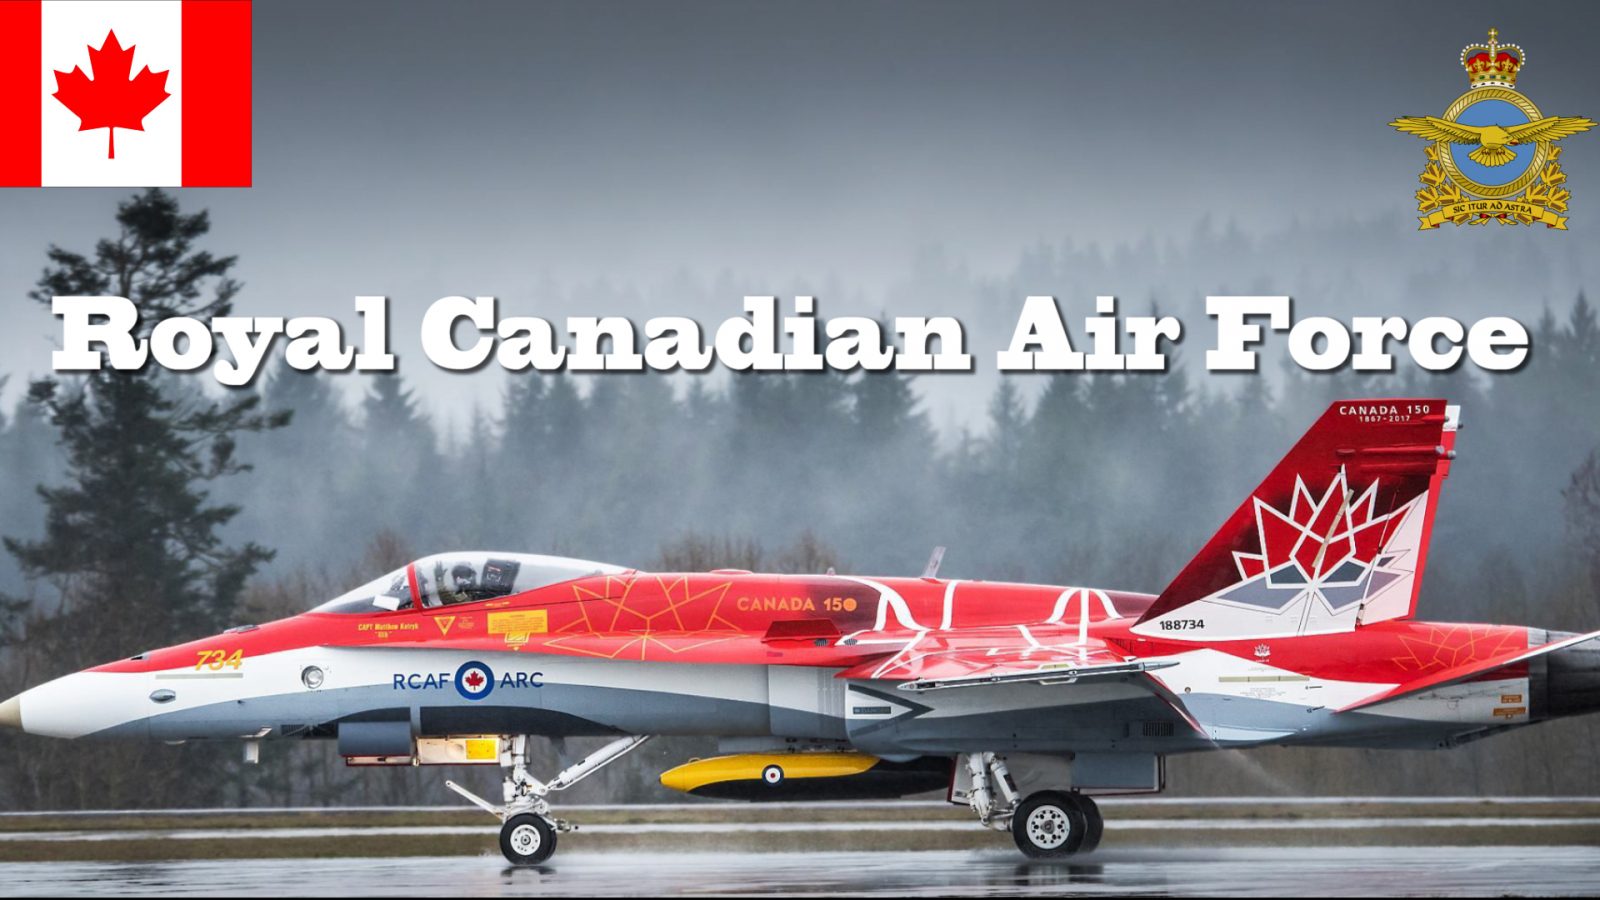 Royal Canadian Air Force Overview